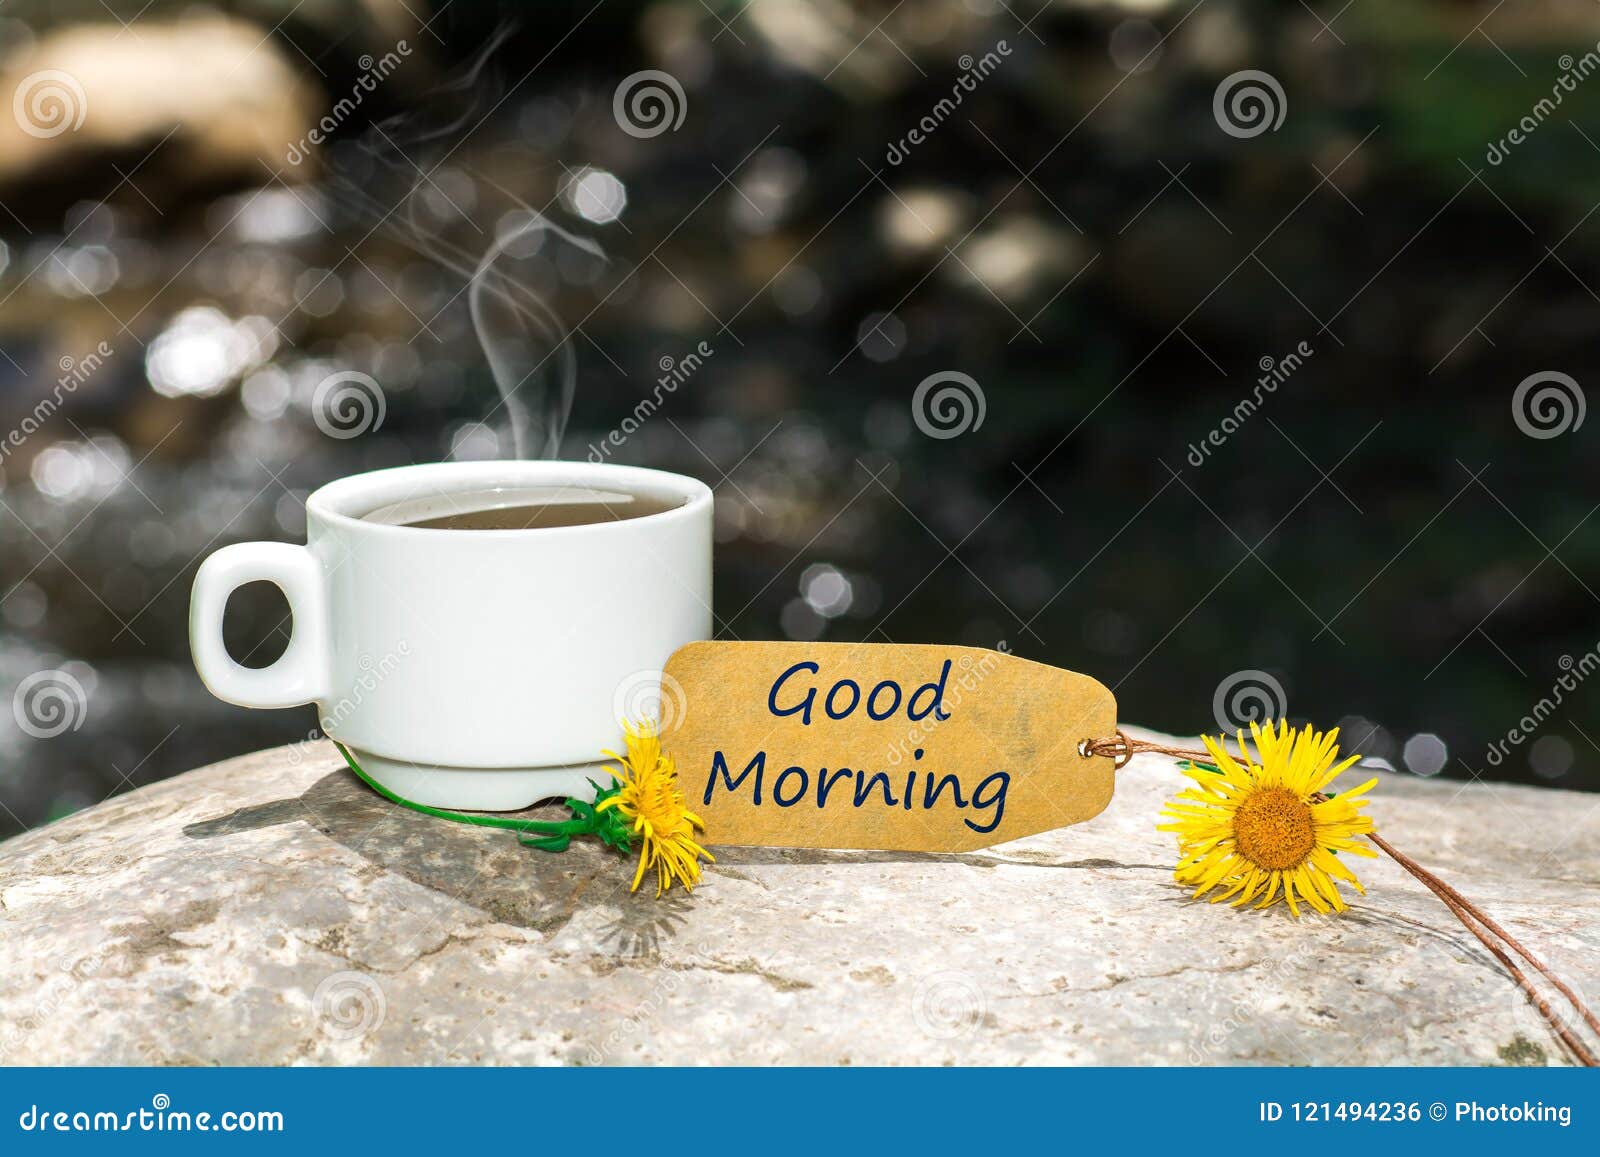 Good Morning Text with Coffee Cup Stock Photo - Image of coffee ...